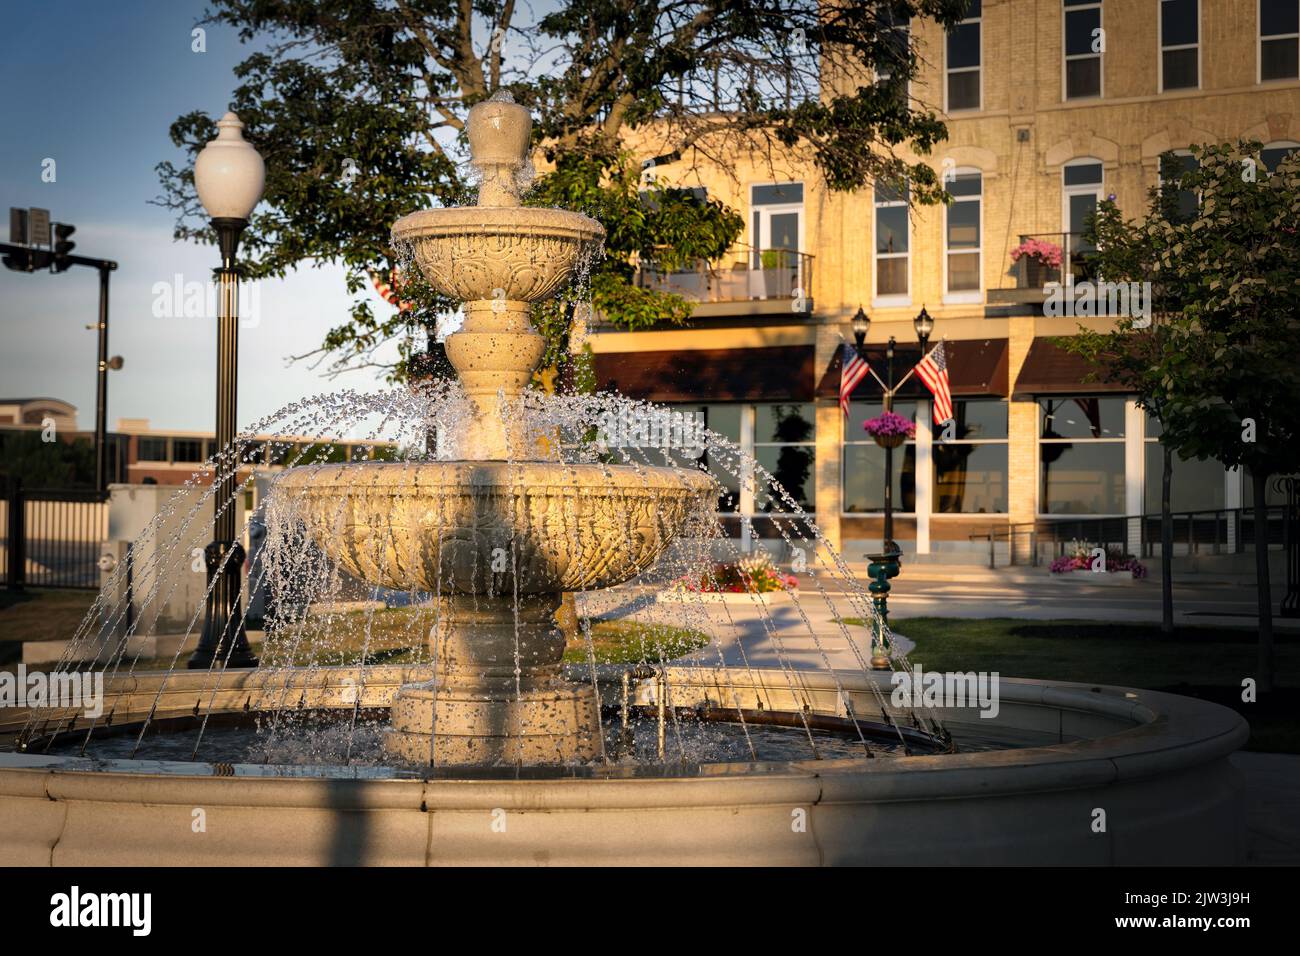 The morning sun warms a fountain in the downtown area of Manitowoc, Wisconsin. Stock Photo